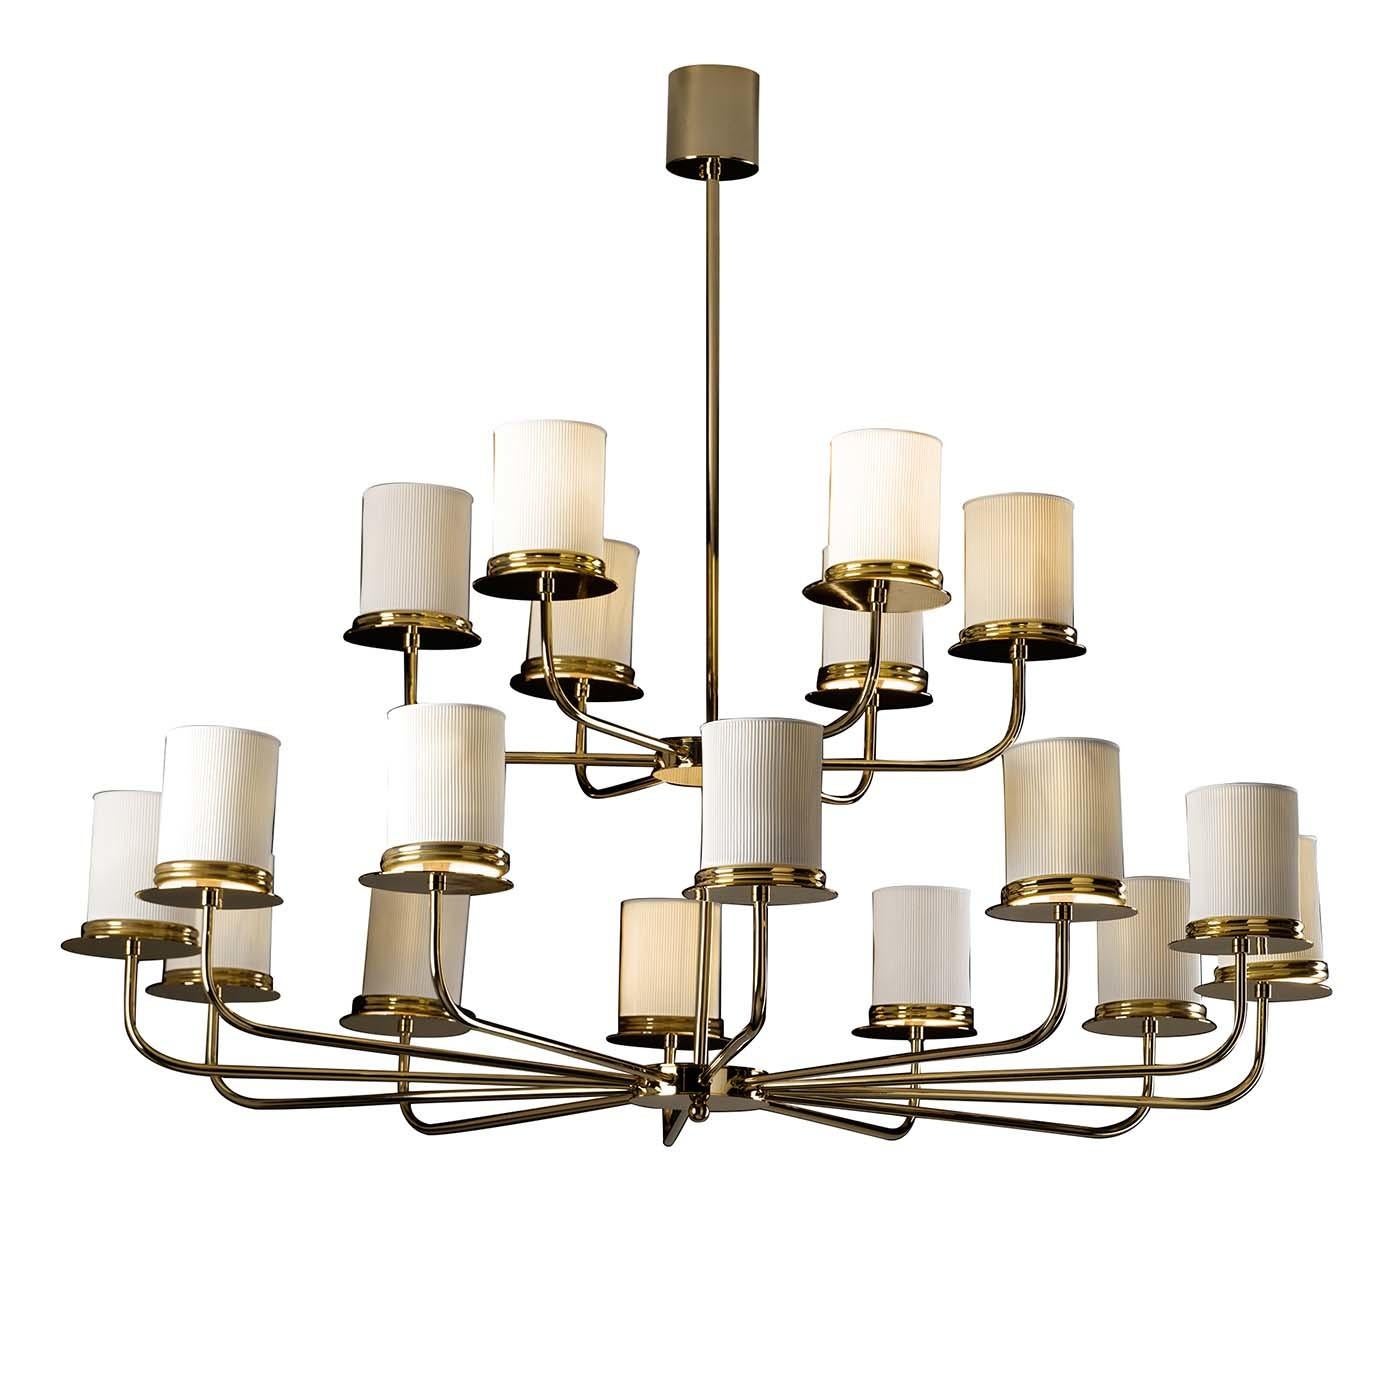 An imposing yet light structure distinguishes this stunning chandelier made of brass and arranged in two tiers with elegantly elongated arms supporting a total of 18 lightbulbs. Each light is delicately screened by a porcelain shade to provide a